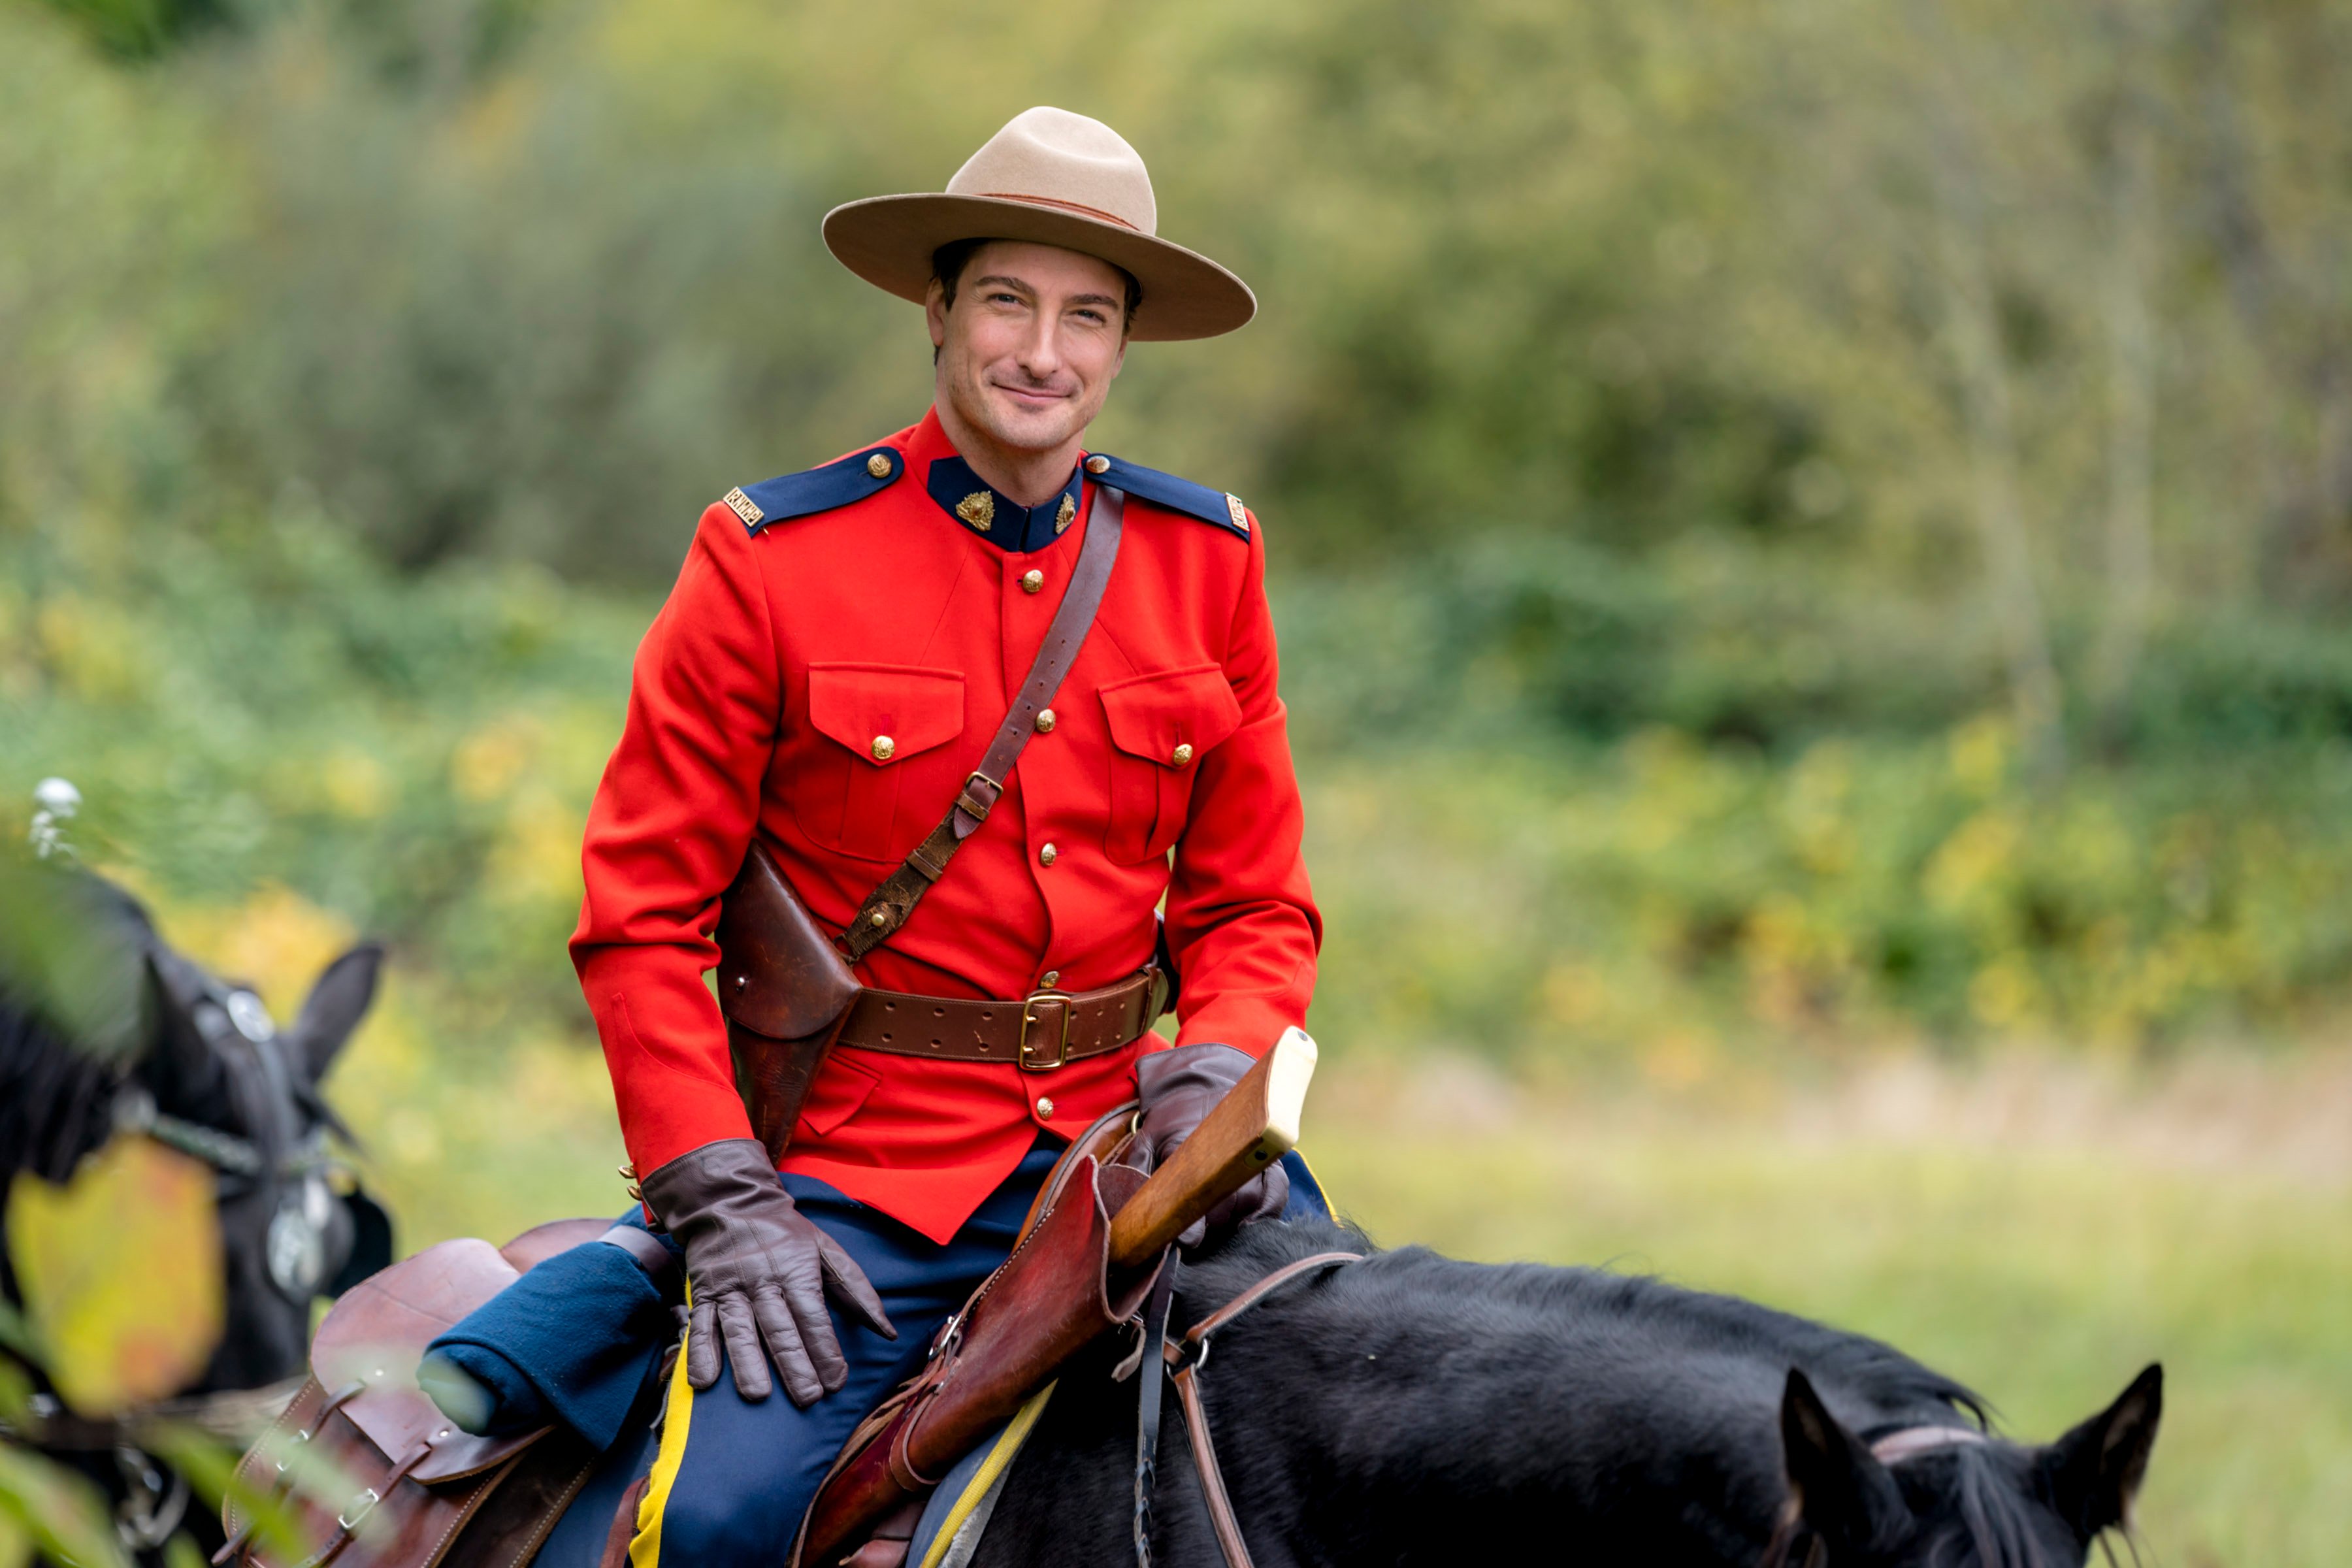 Daniel Lissing as Jack Thornton wearing a red jacket and hat and riding a horse in 'When Calls the Heart'